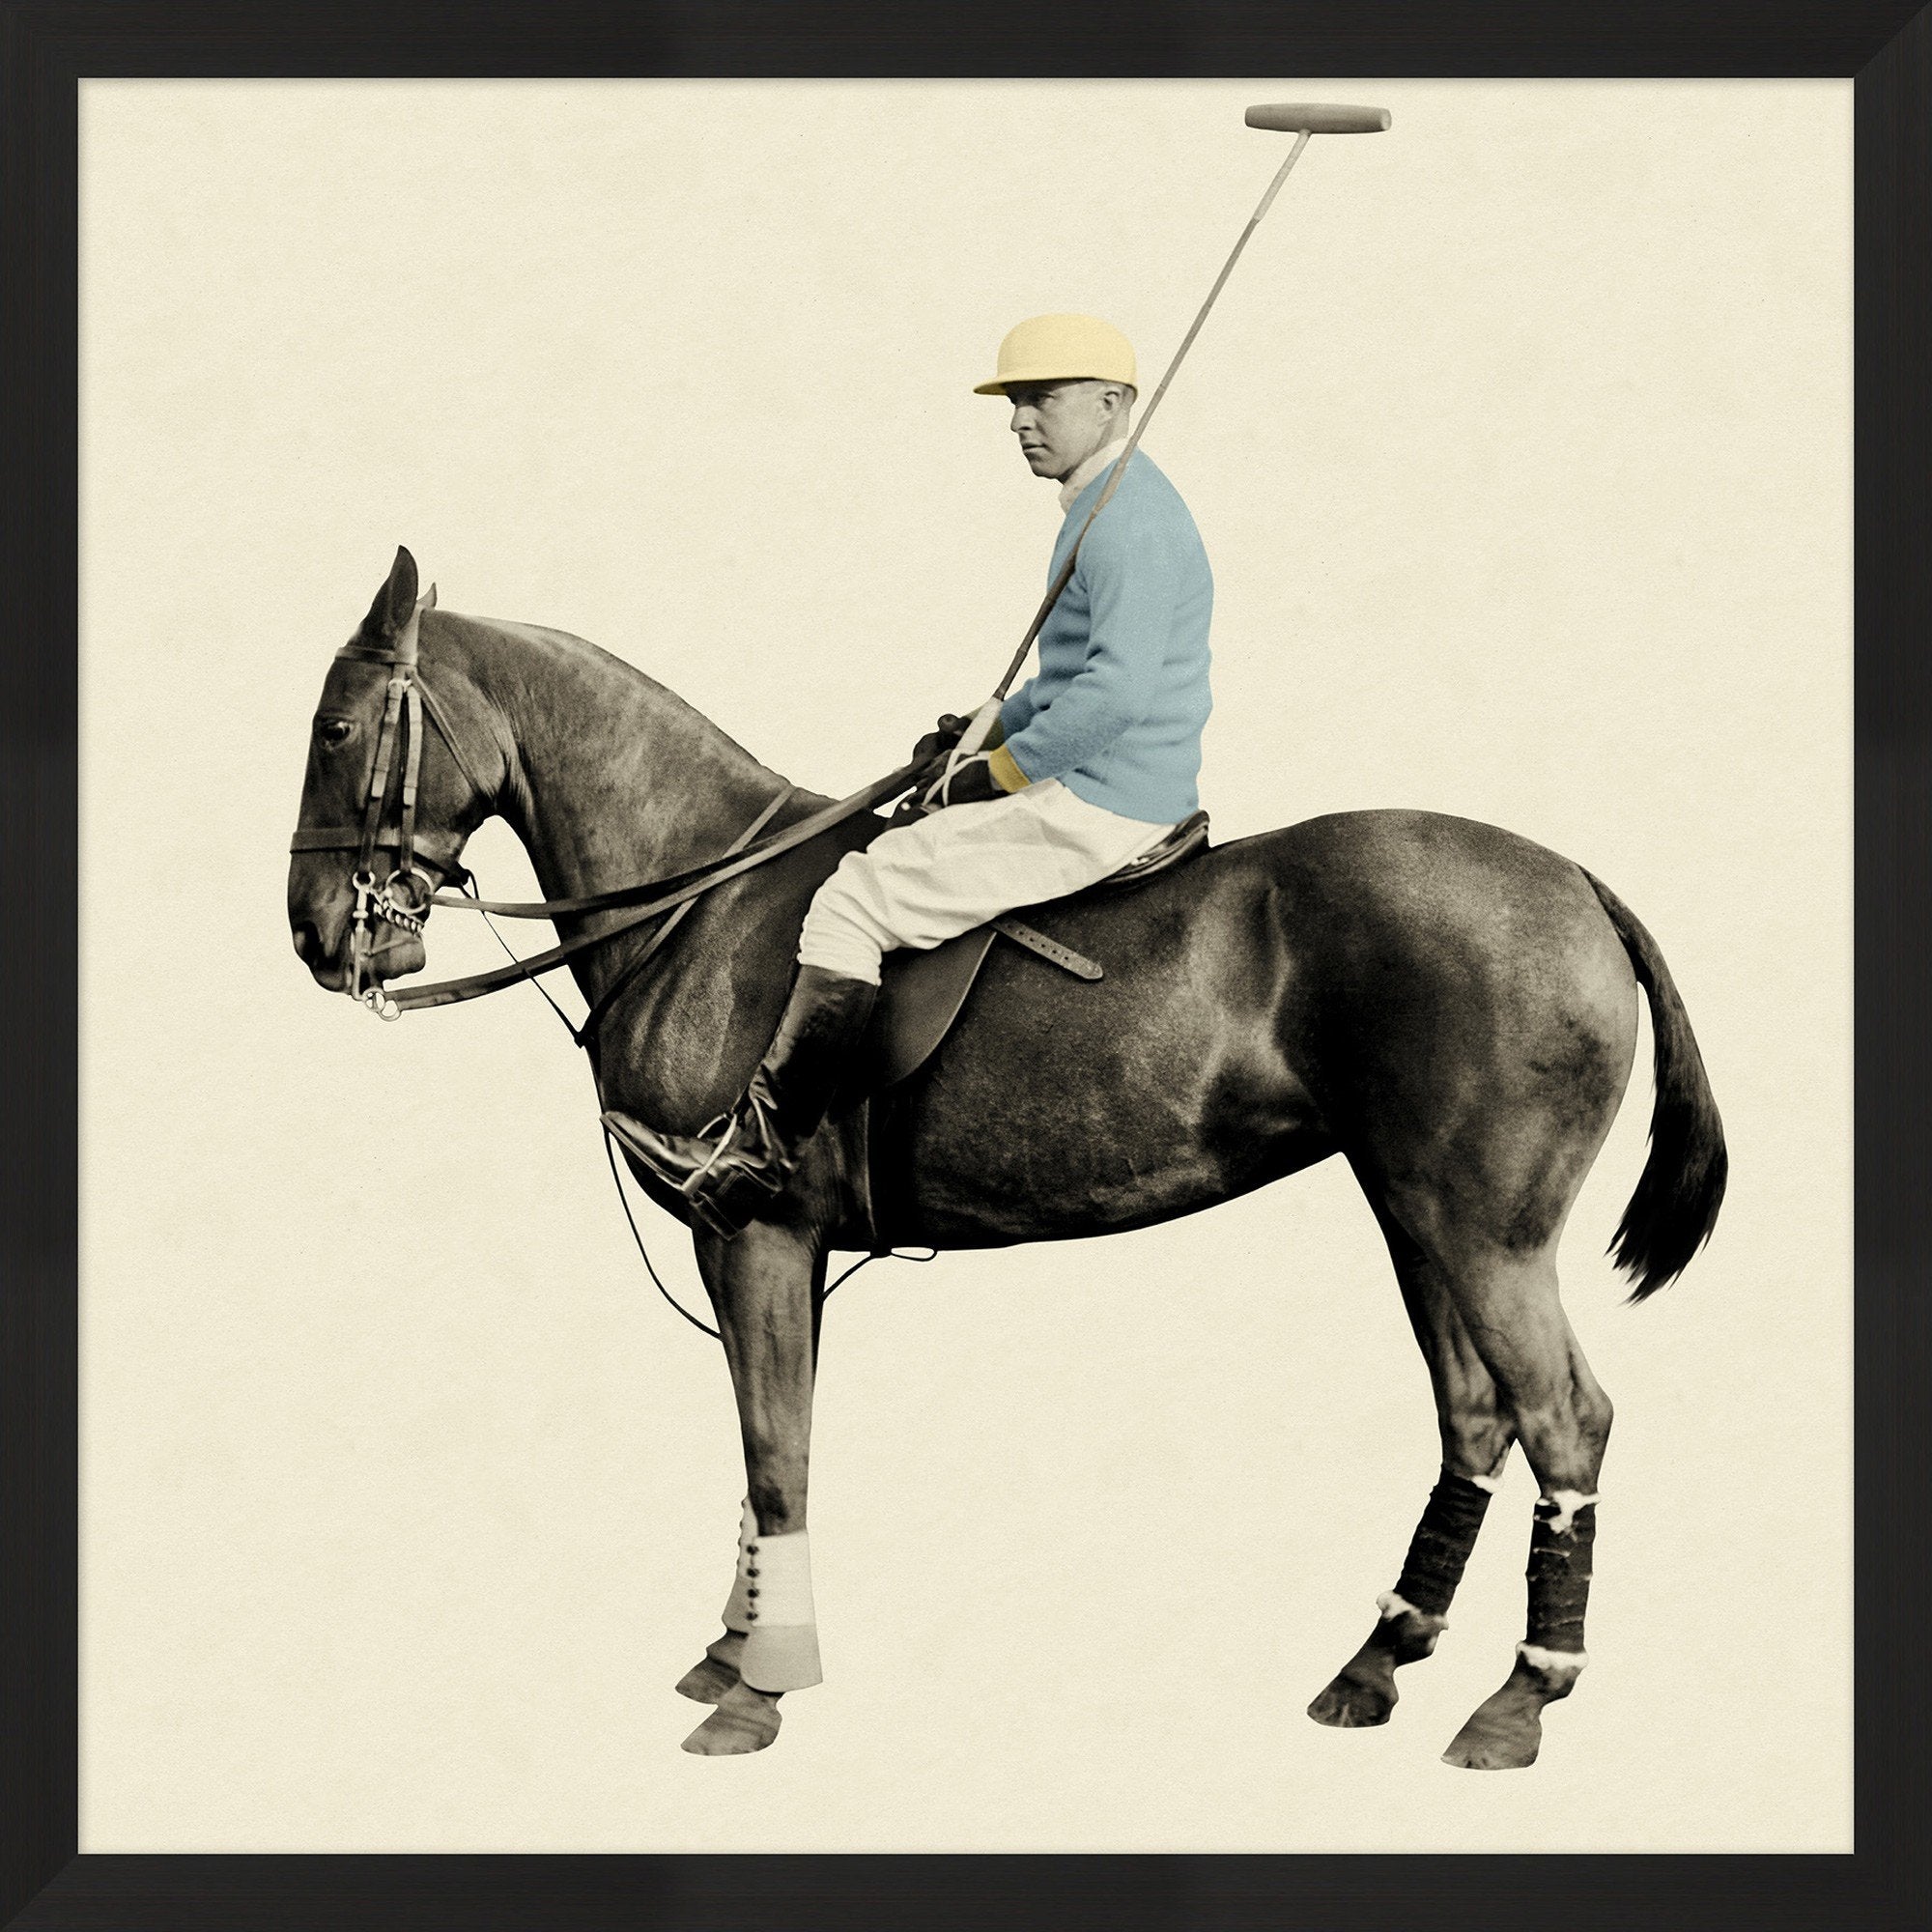 Captured beautifully in this framed photograph, the Dapper Horsemen #2 Art features a man in soft blue and yellow is striking saddled on the horse.  Specialty: Straight Fit (No Mats)  Medium: Matte Paper Treatment: Straight Fit (No Mats) Size: 38.5"w x 38.5"h